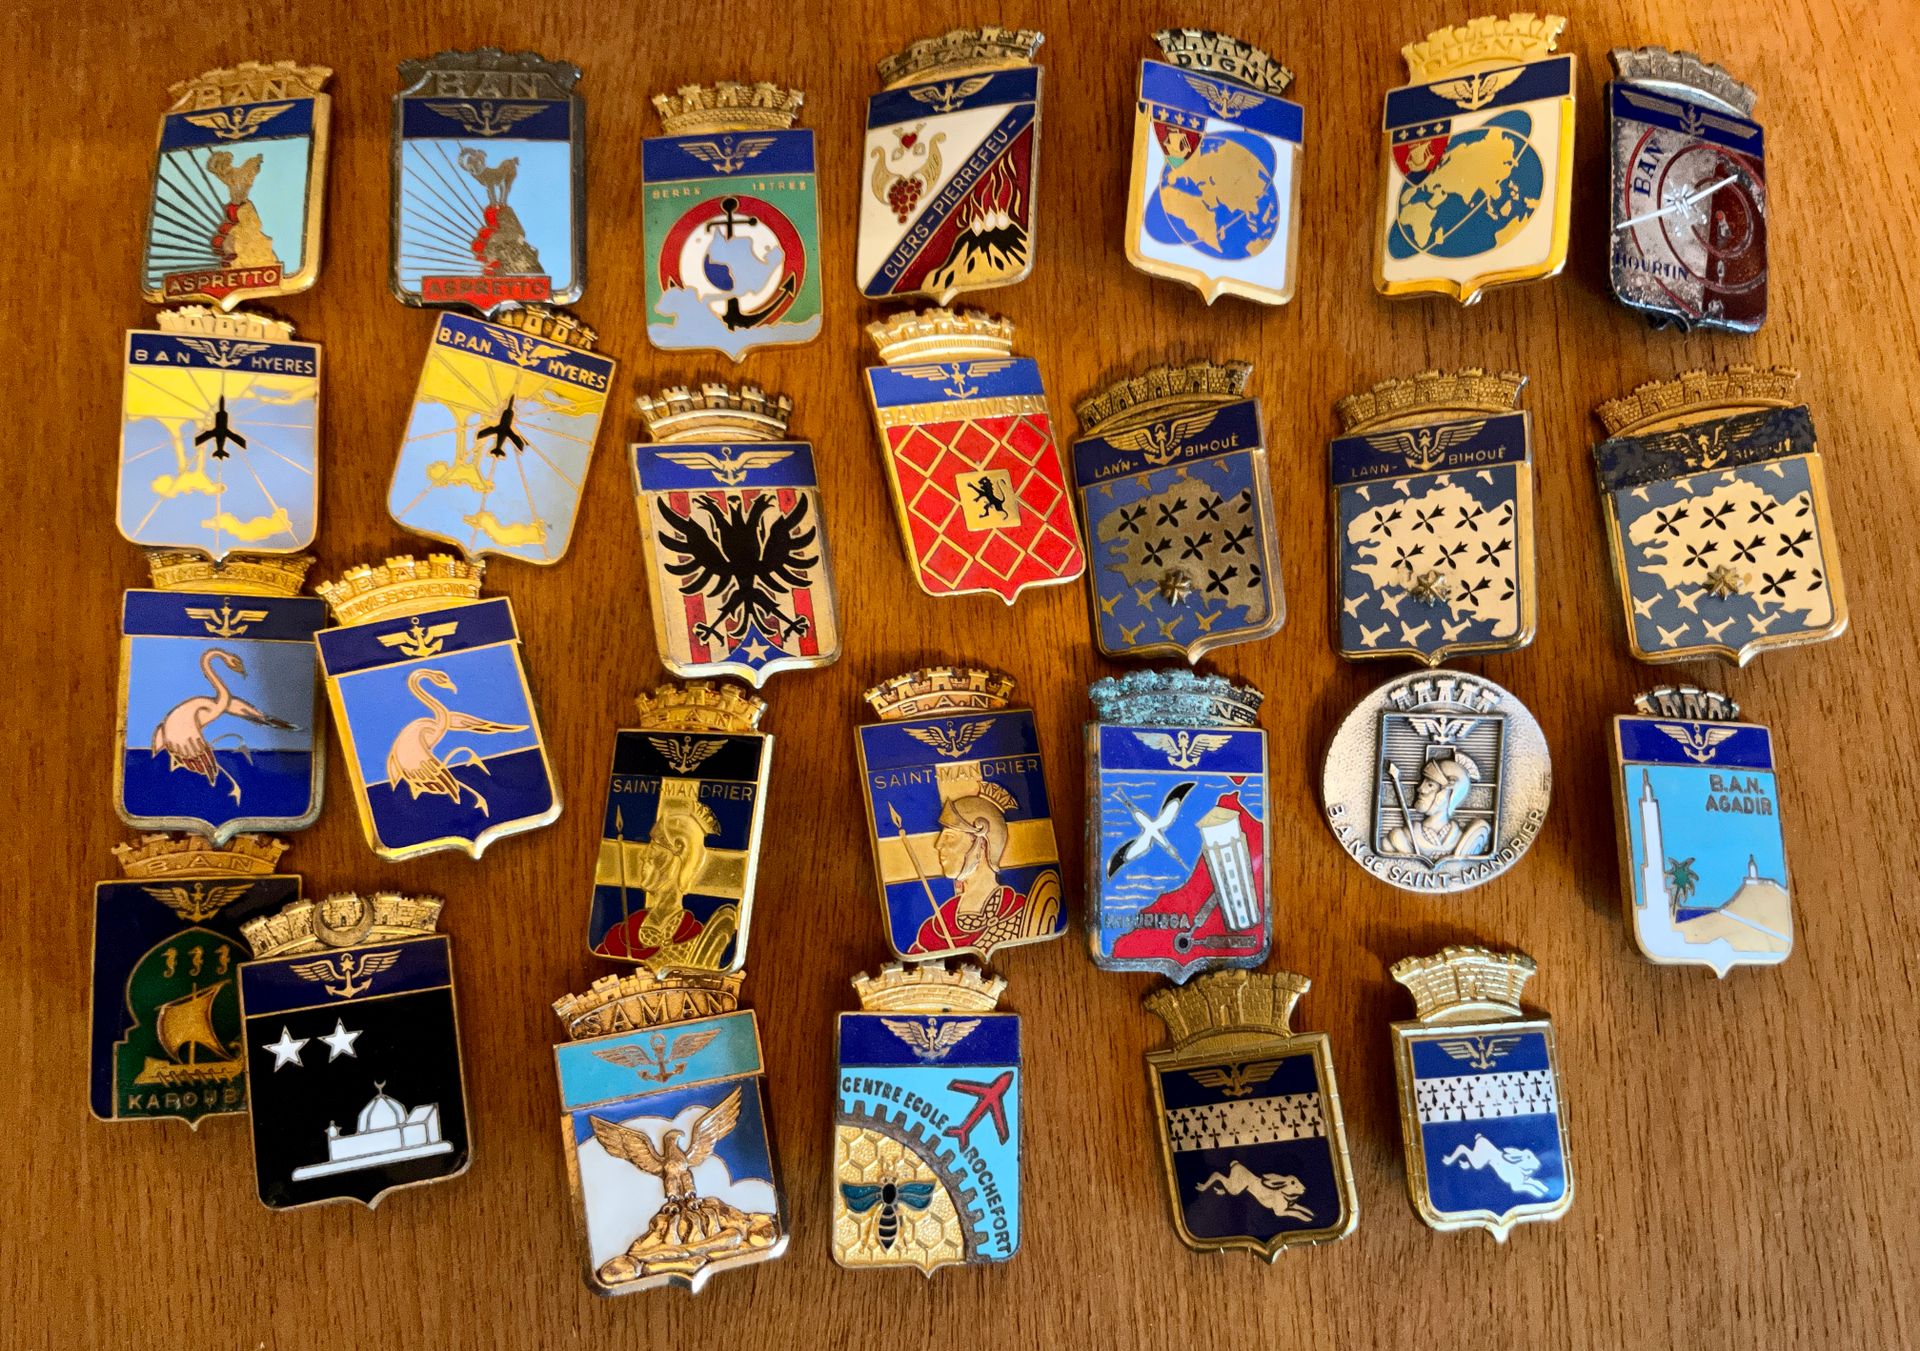 Null 27 insignia of AFN and other naval bases, including Berre base without atta&hellip;